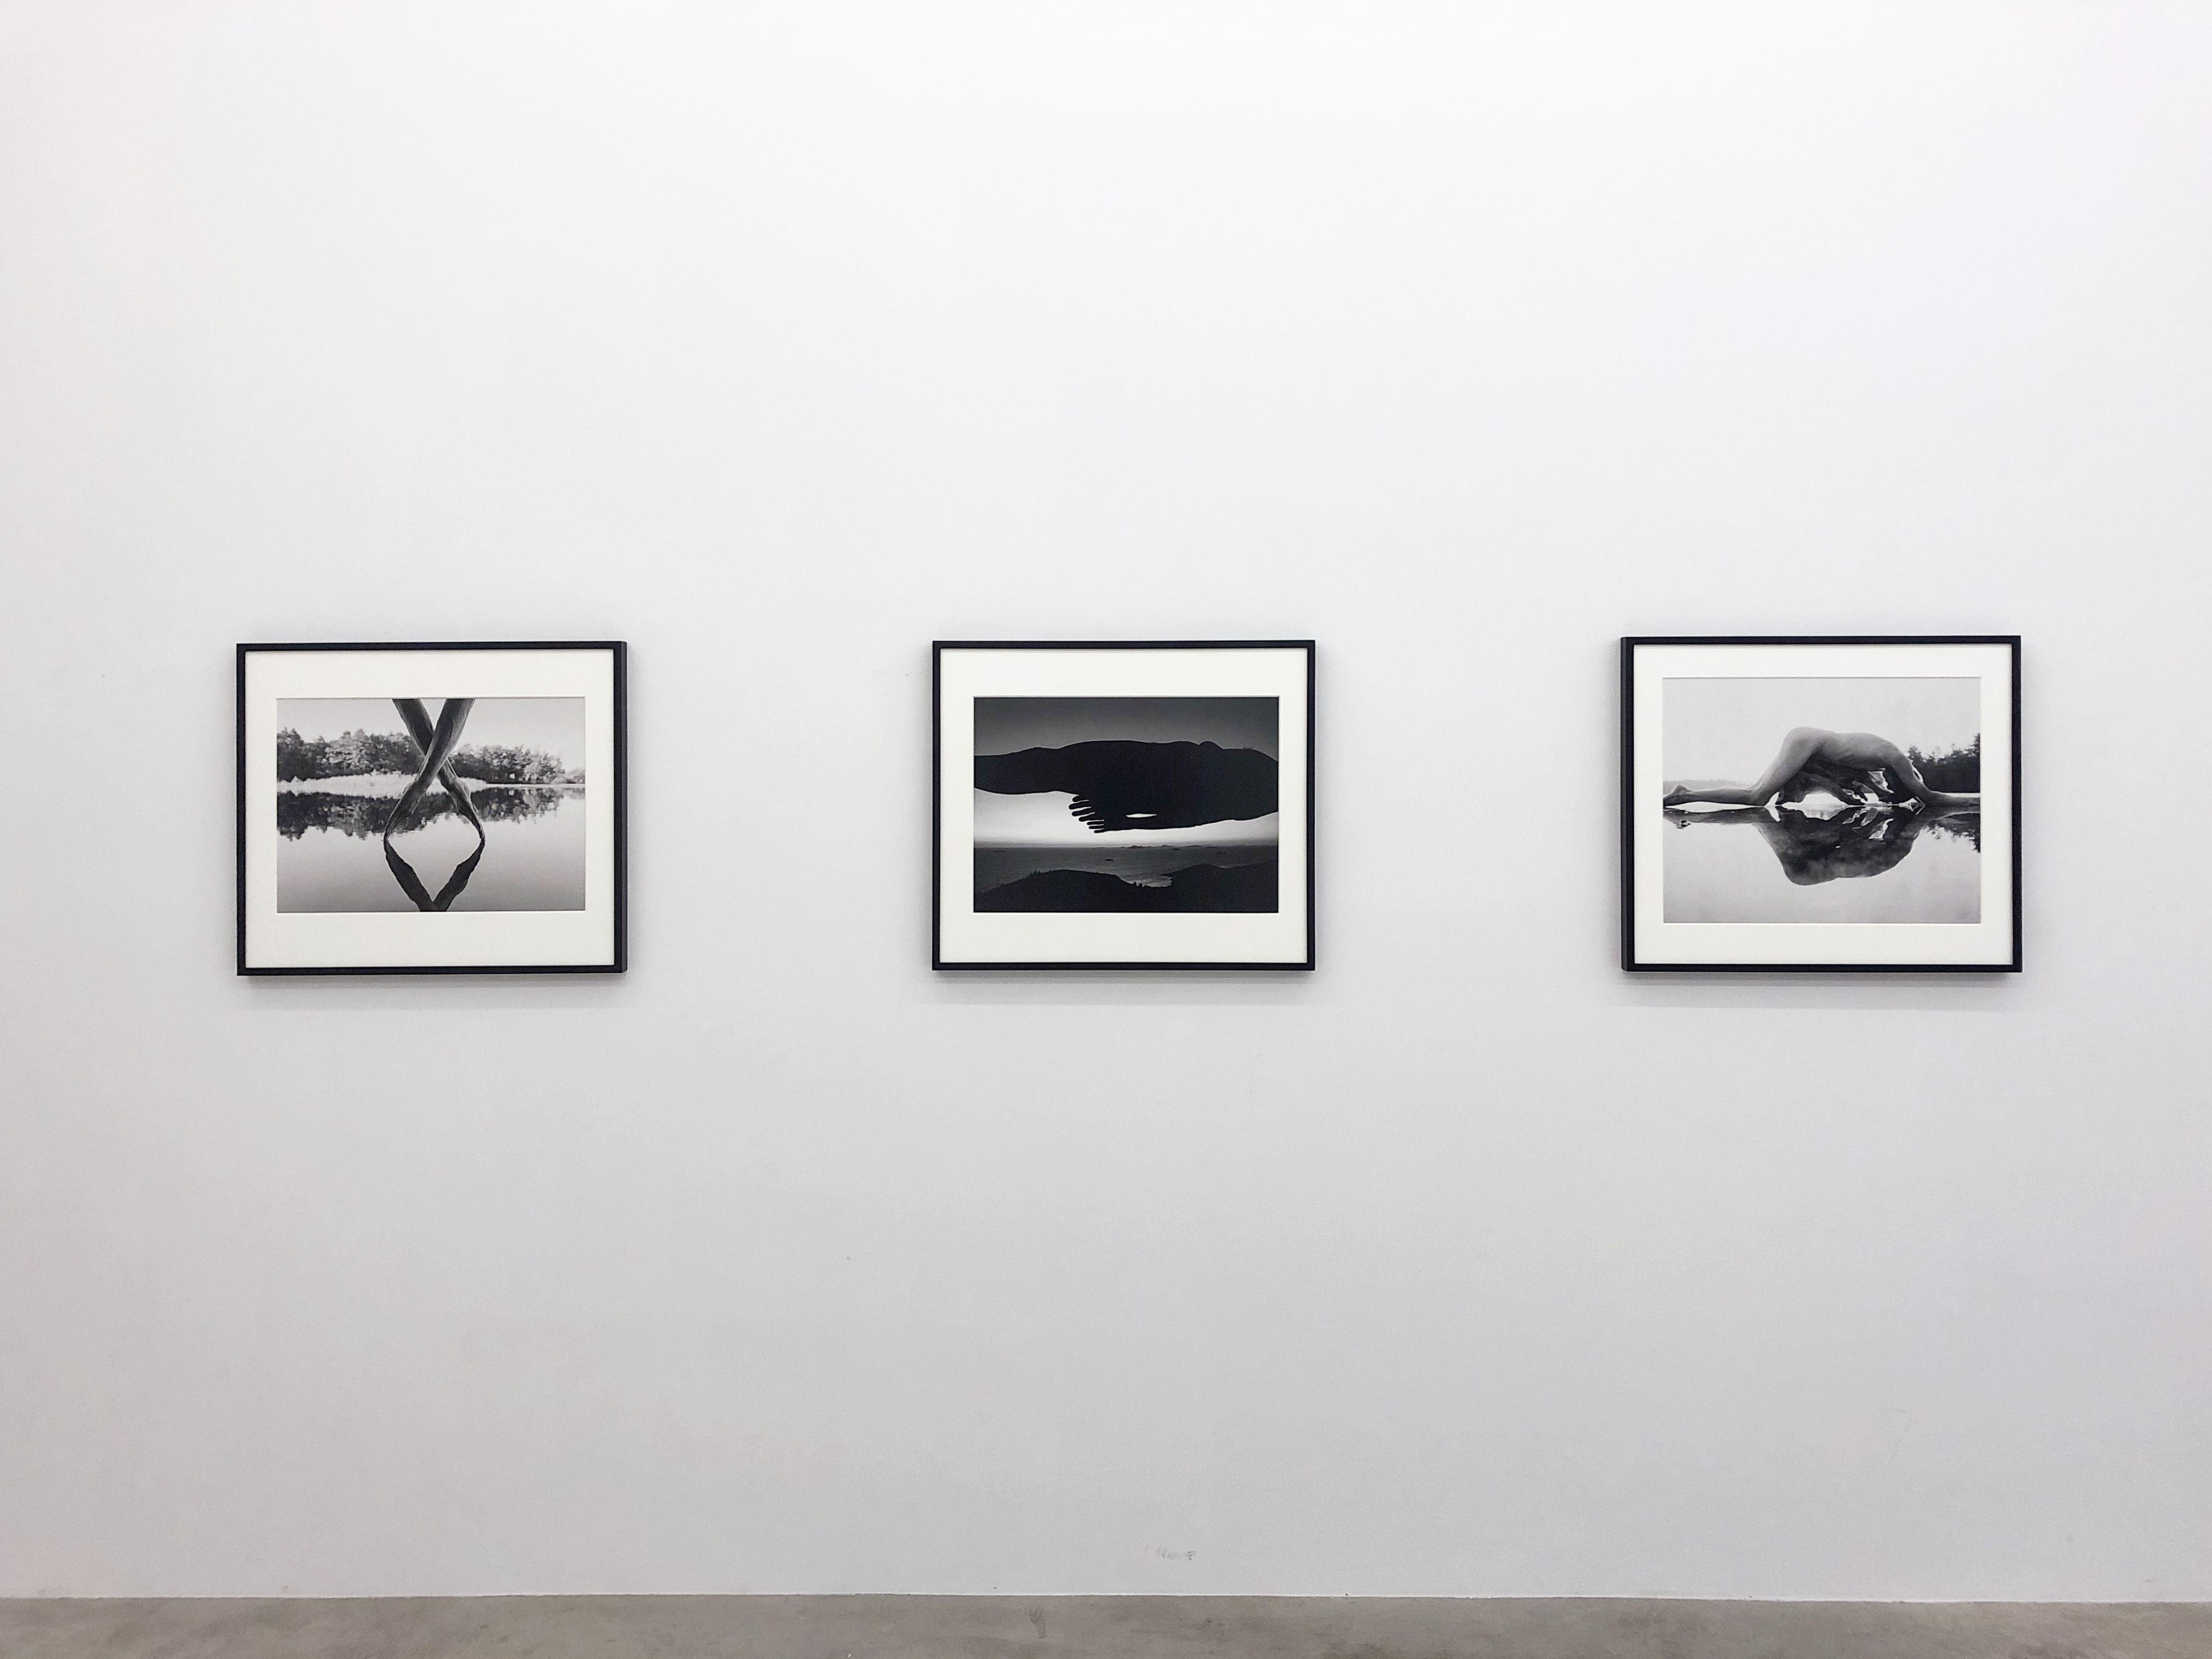 Installation View at Persons Projects, Berlin, Germany 2020